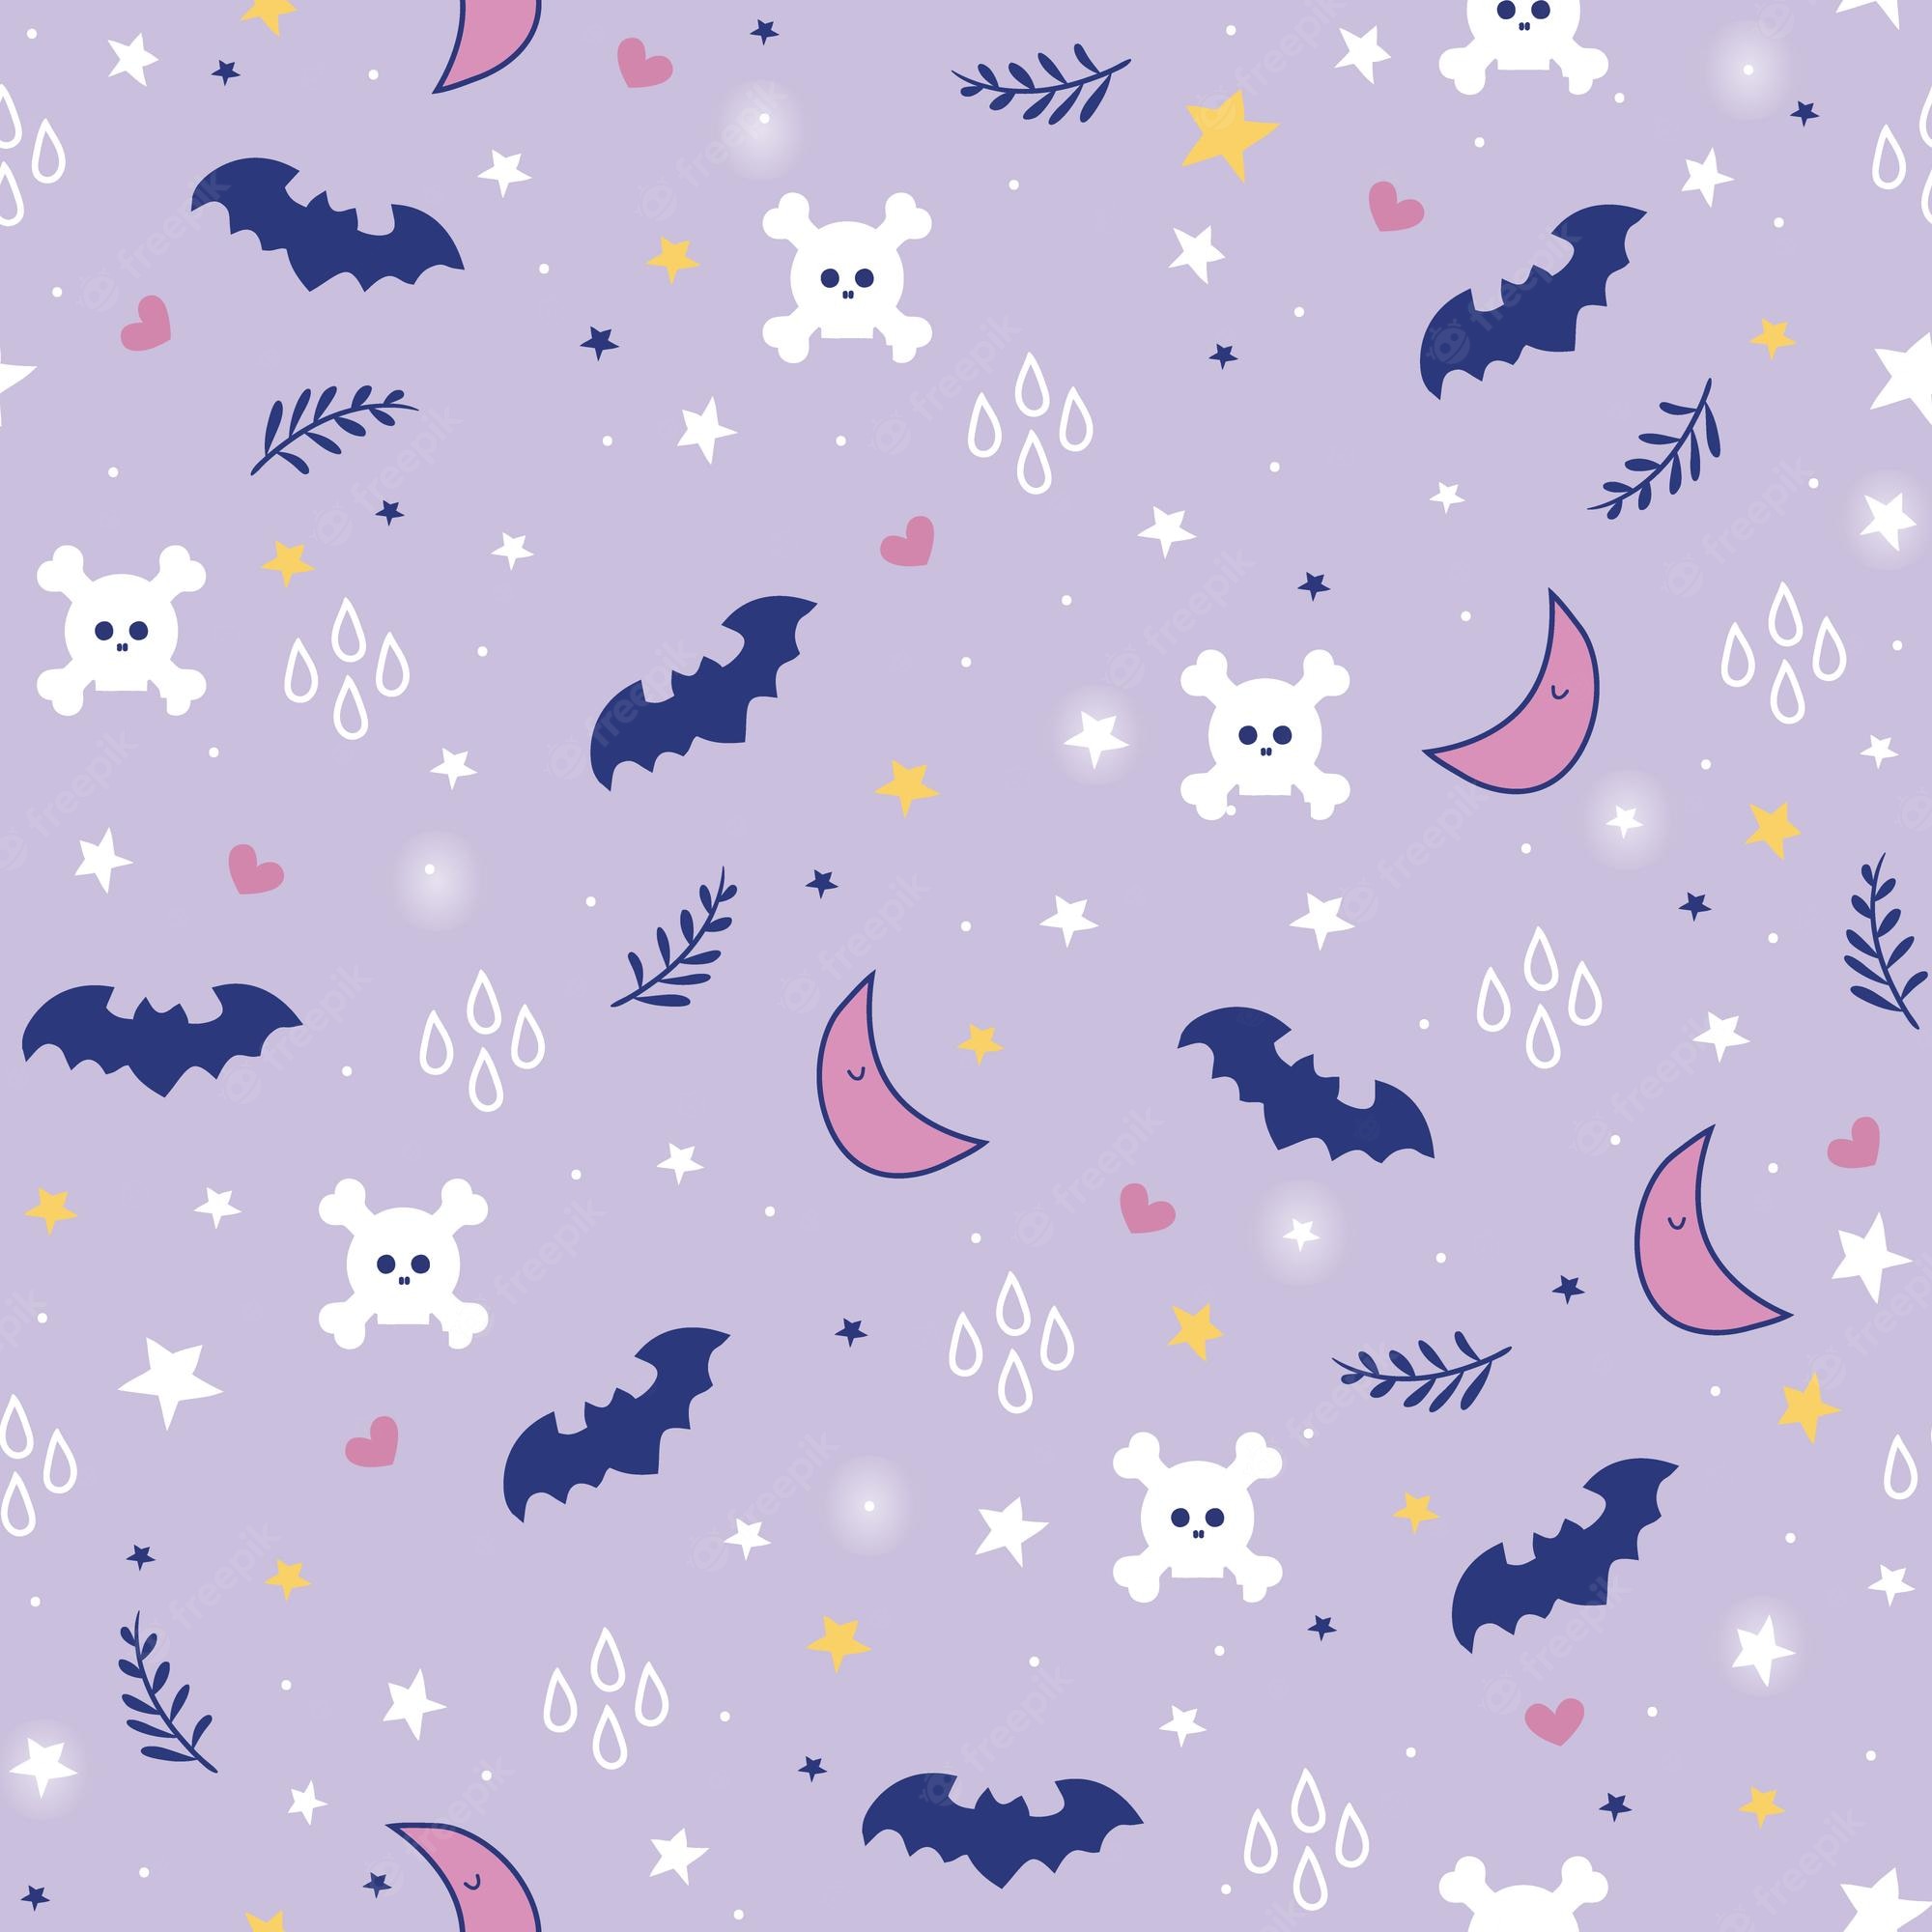 Premium Vector. Seamless pattern cute purple halloween design for background, wallpaper, clothing, wrapping, fabric